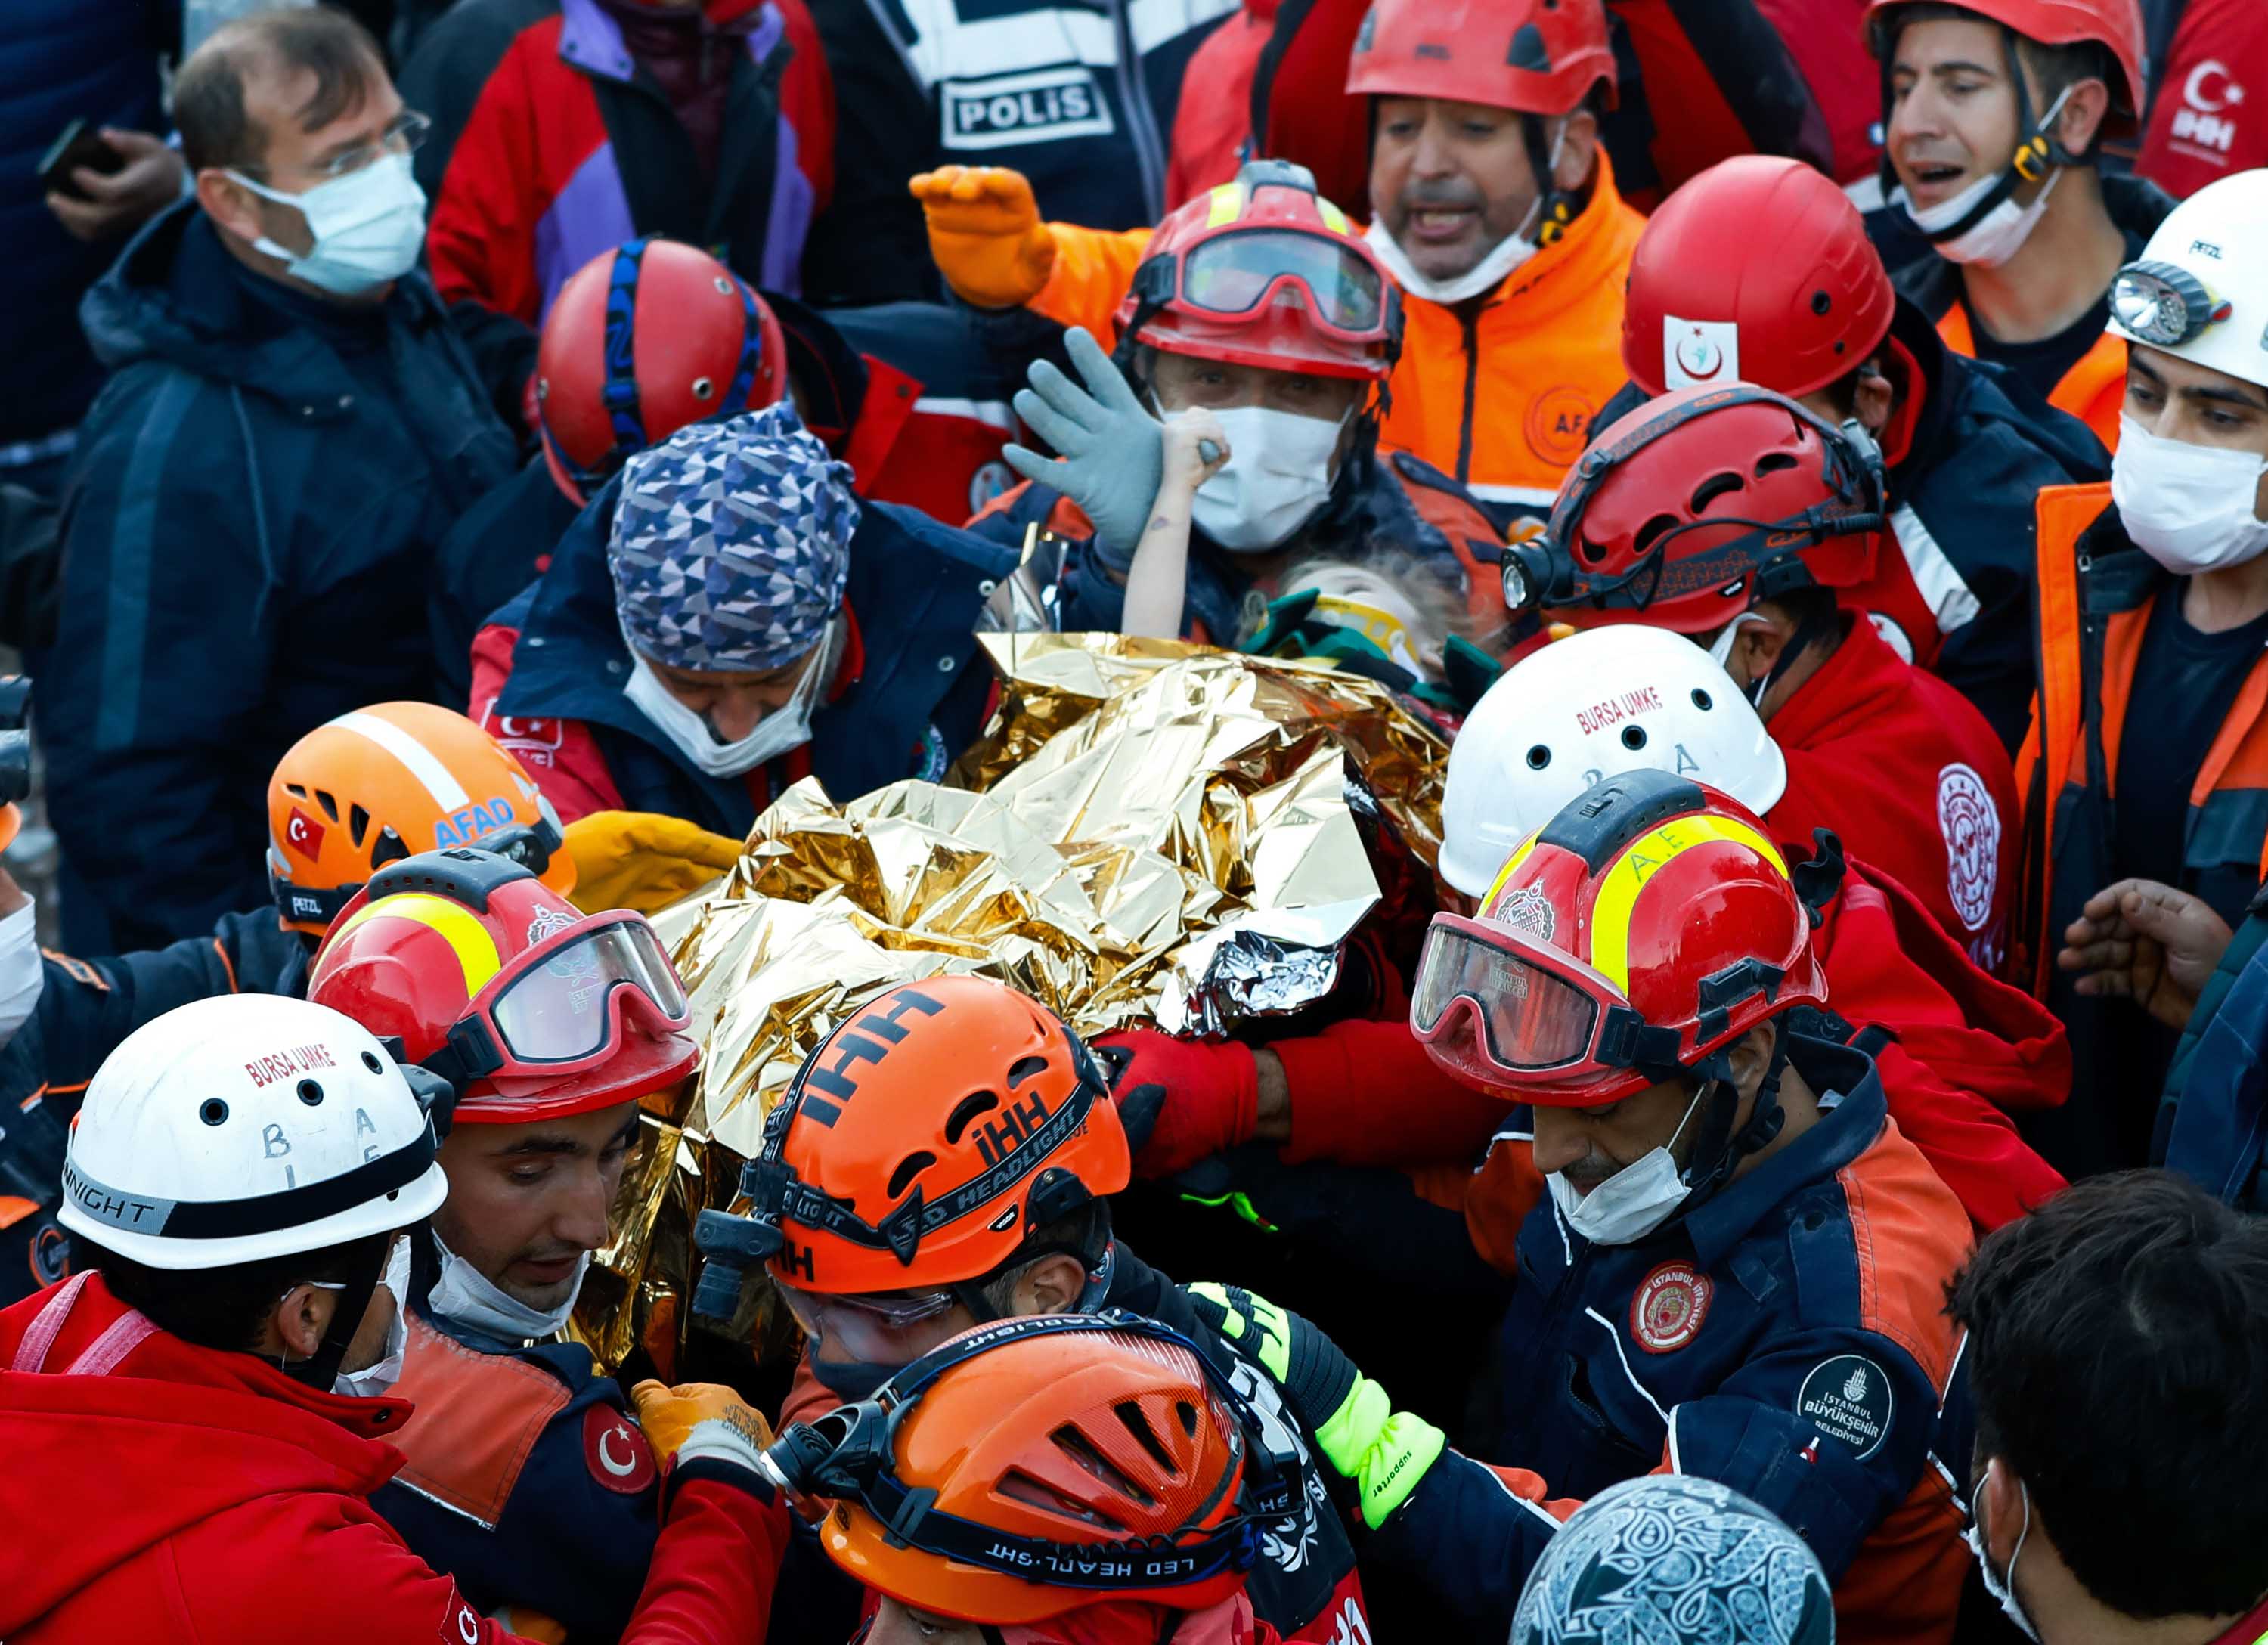 Rescuers carry 3-year-old Elif Perincek after she was rescued from the rubble of a building in Izmir, Turkey, on Monday, November 2.